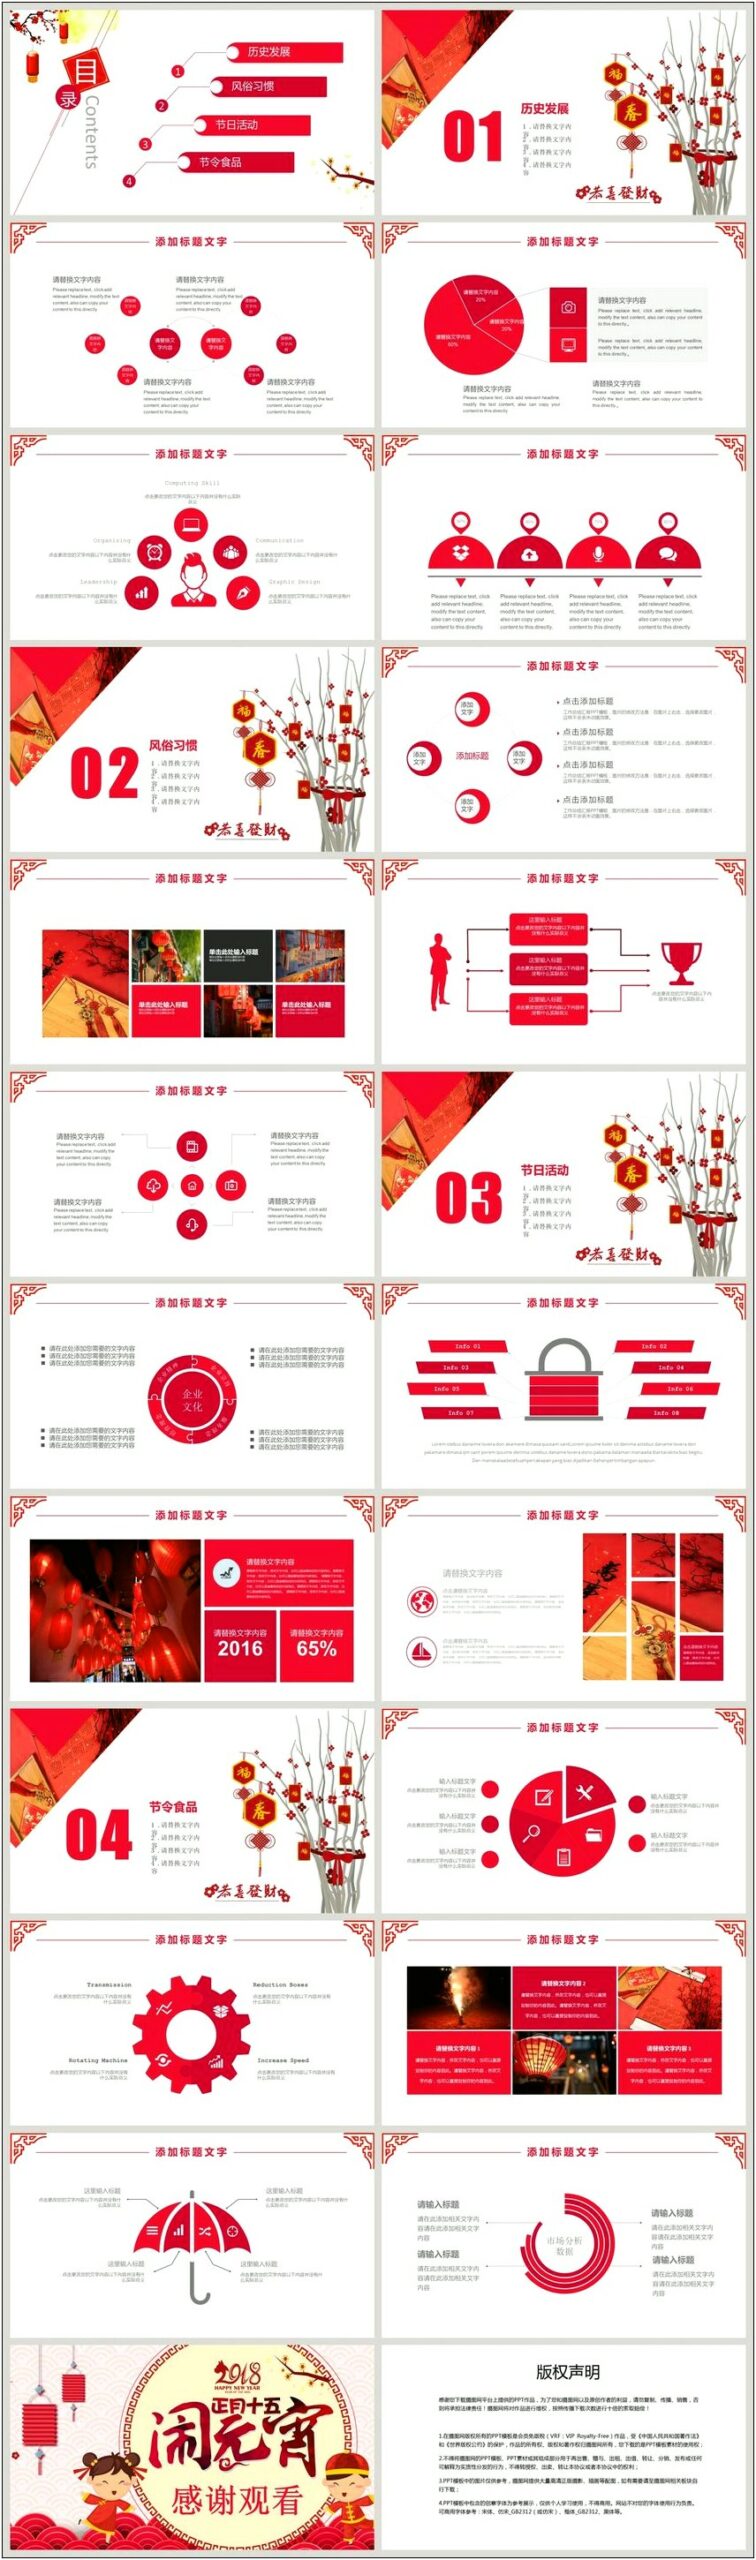 Powerpoint Templates Free Download 2016 Communication